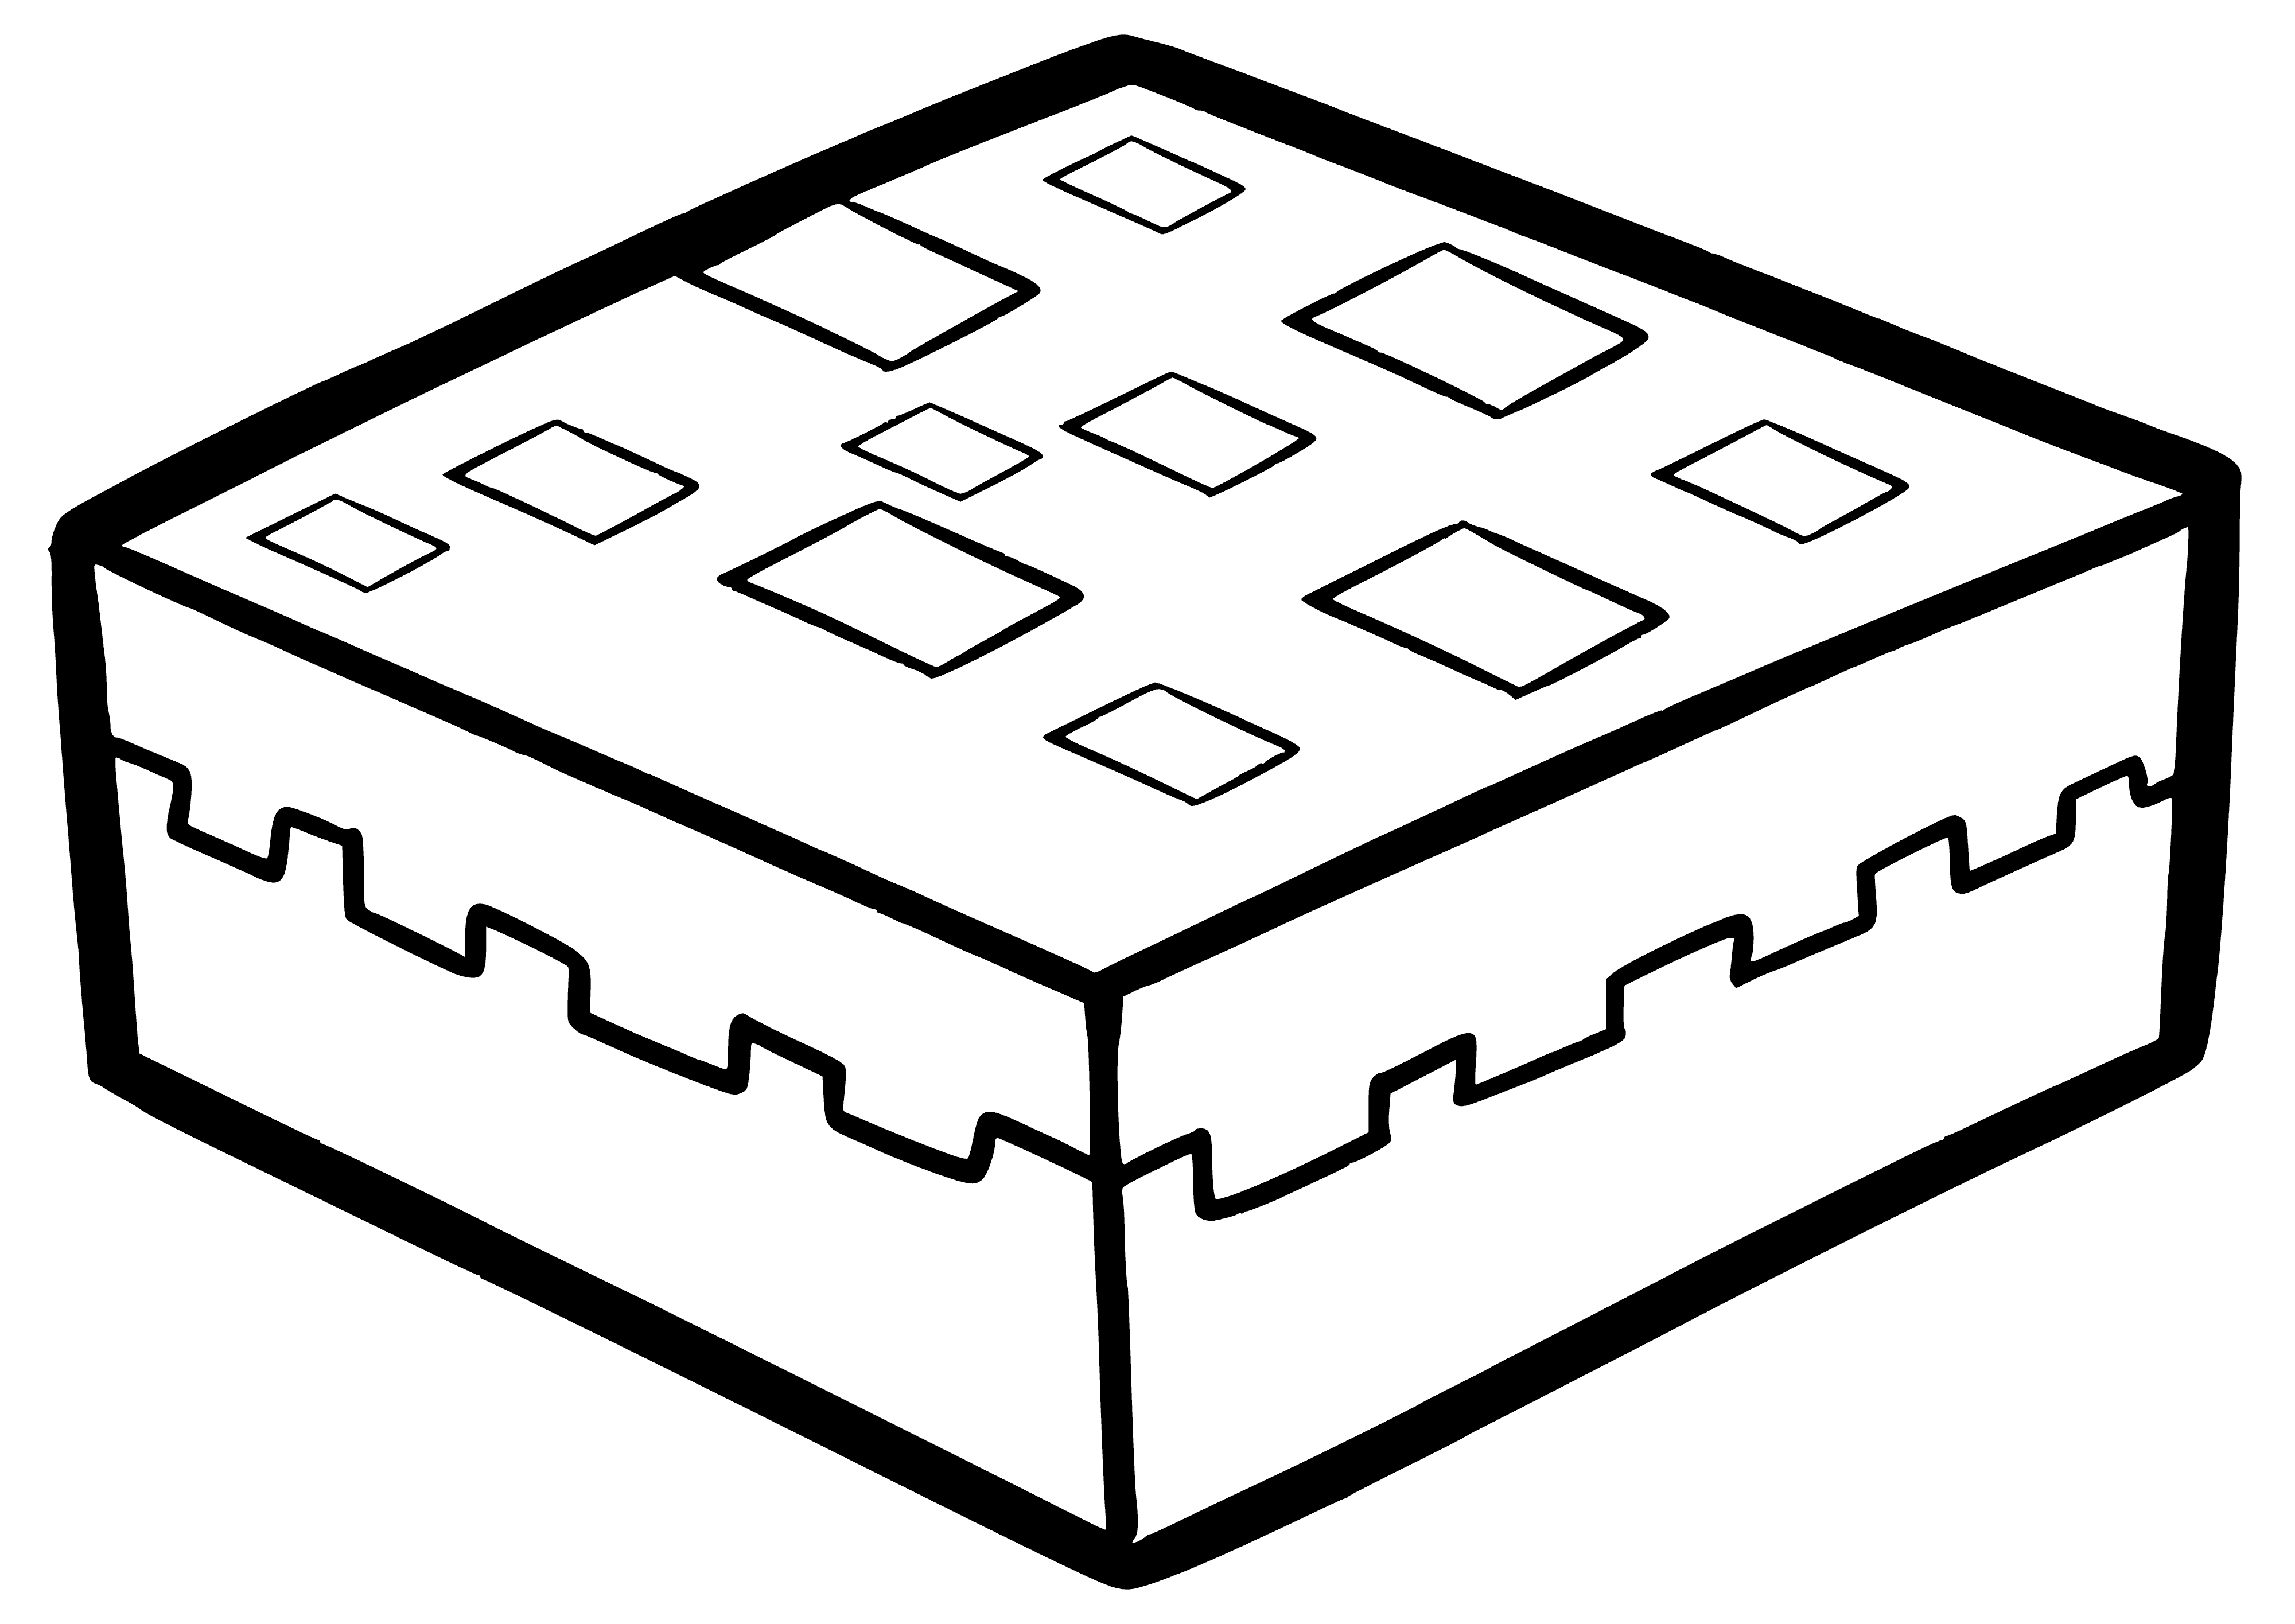 Minecraft cake coloring page